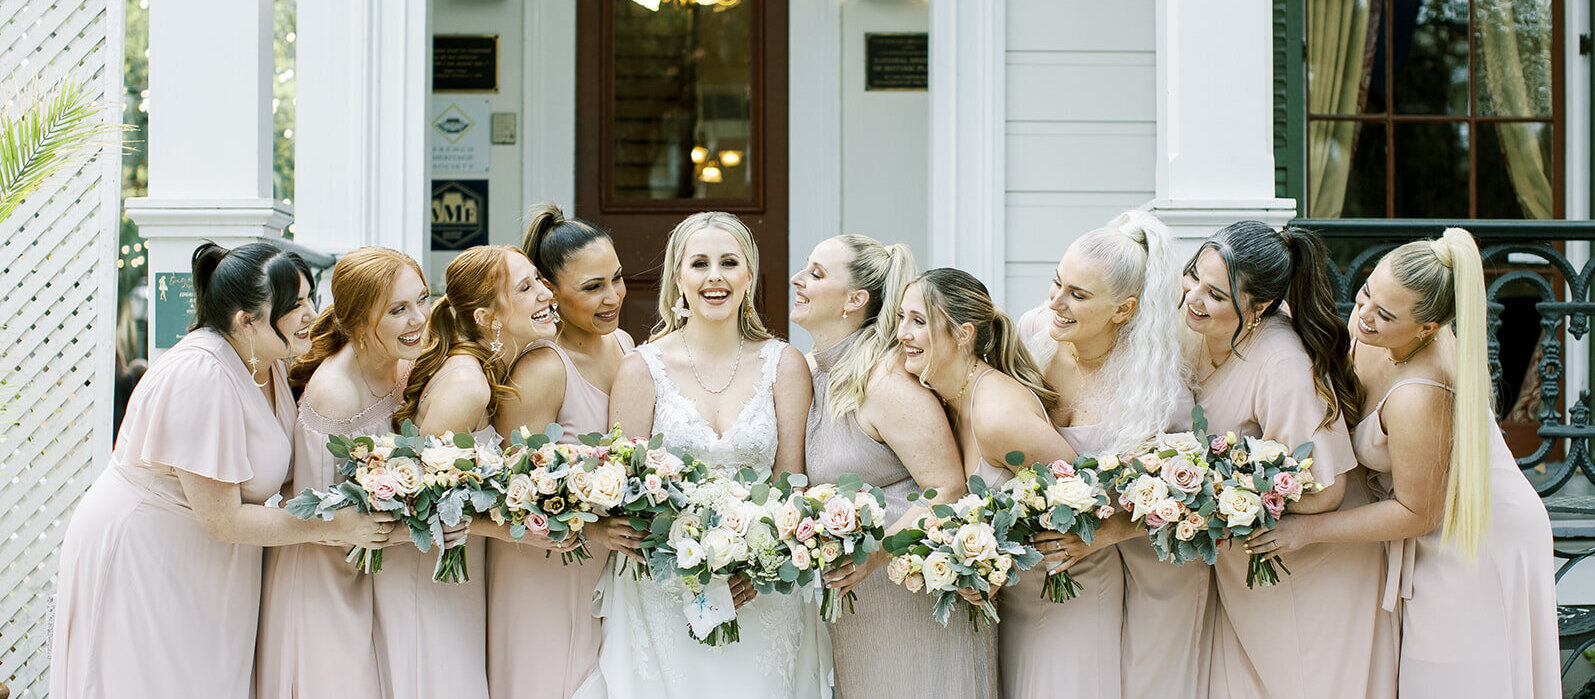 New Orleans Bridesmaids holding flowers